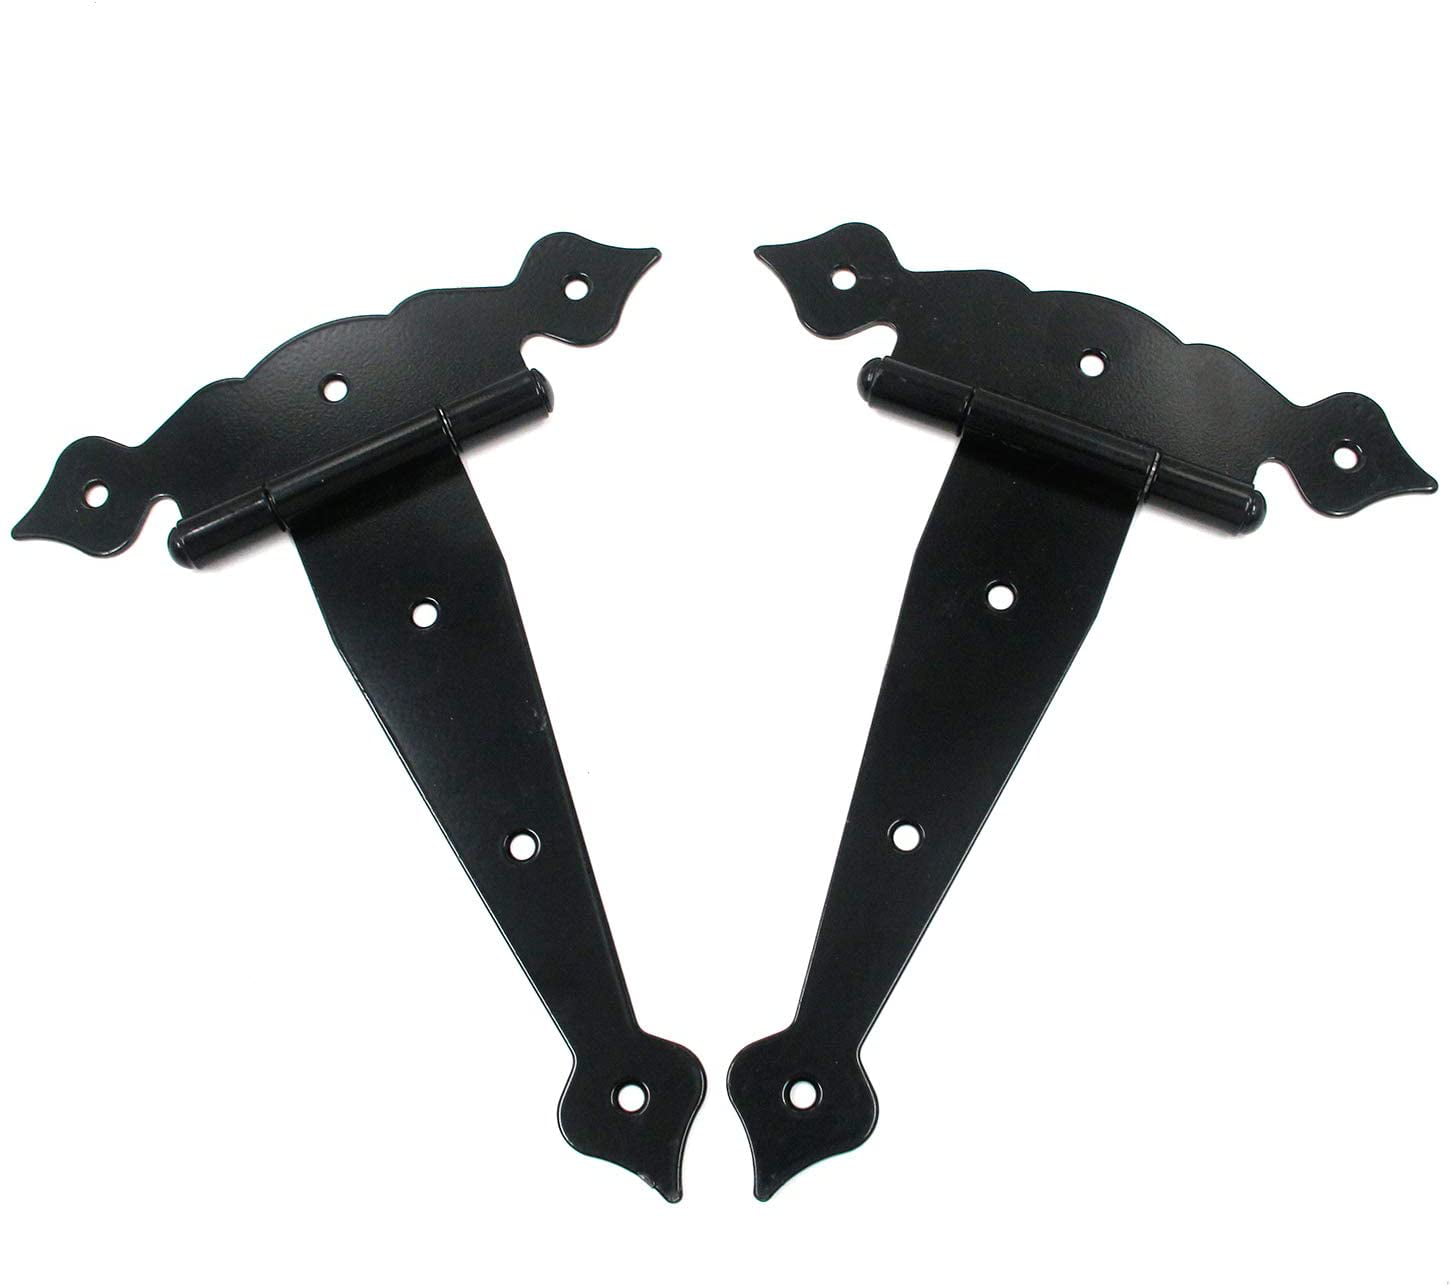 B14 Door Hinge Gate Shed 8 Inch Black Heavy Duty Decorative Strap 2 Pack 